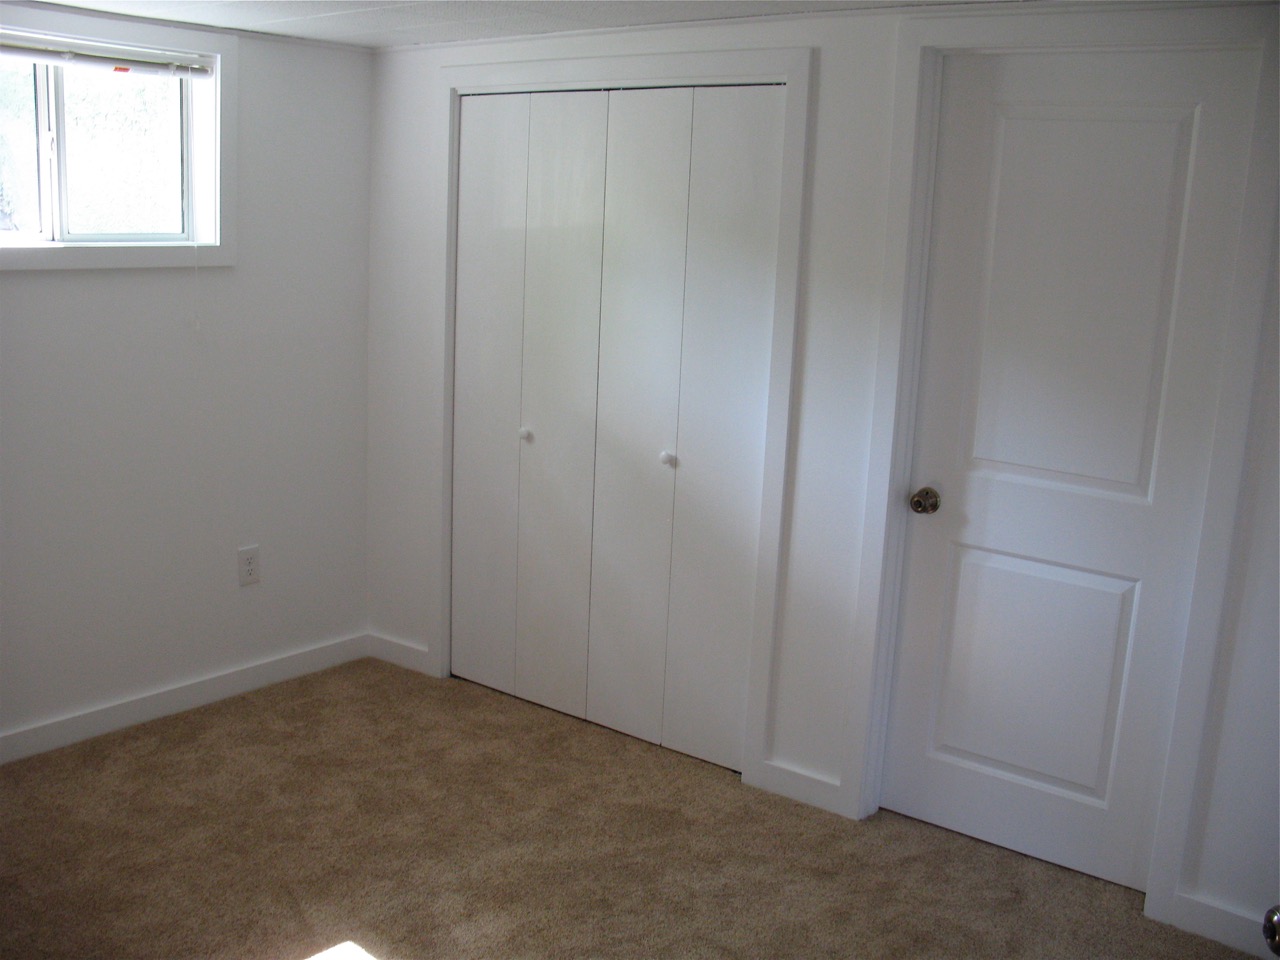 Bedroom and new closet